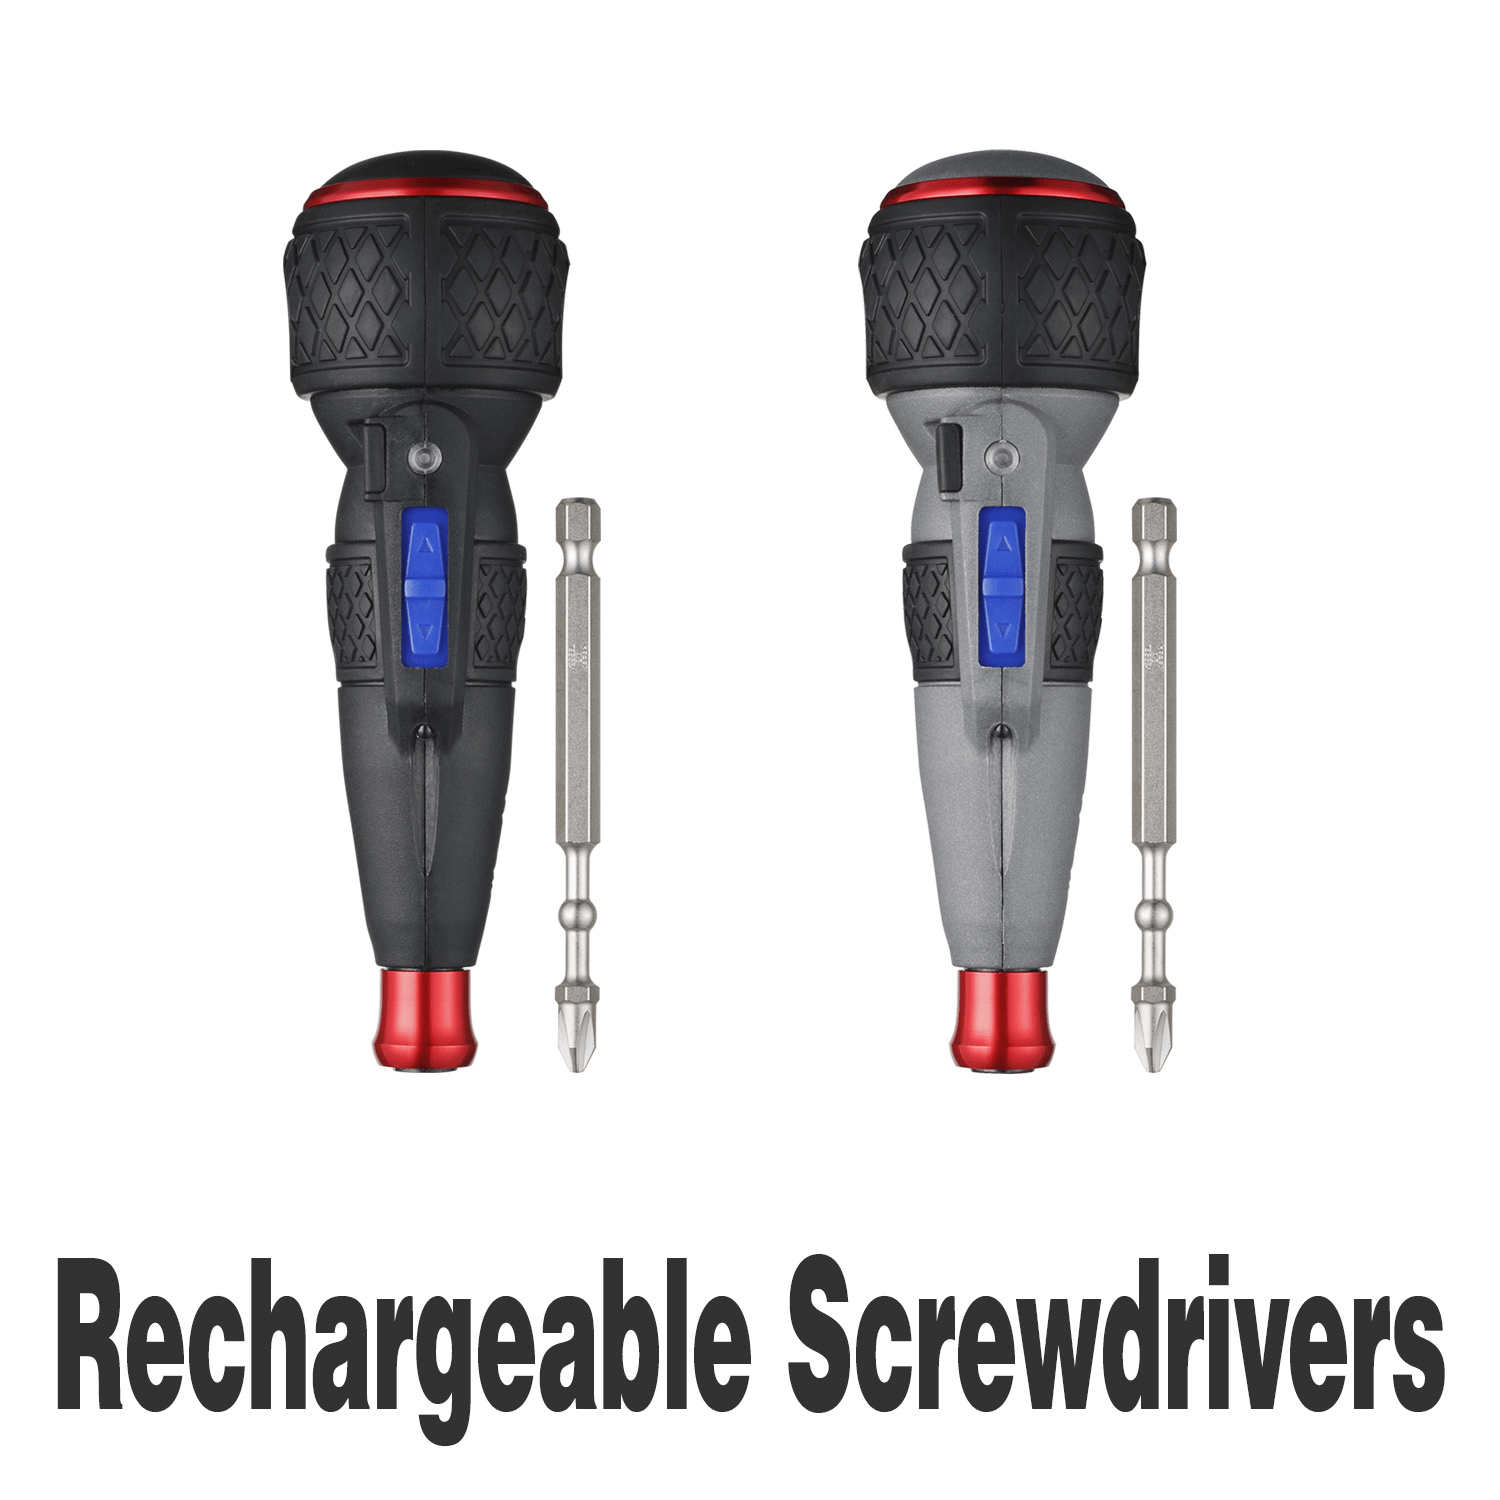 Rechargeable Screwdrivers